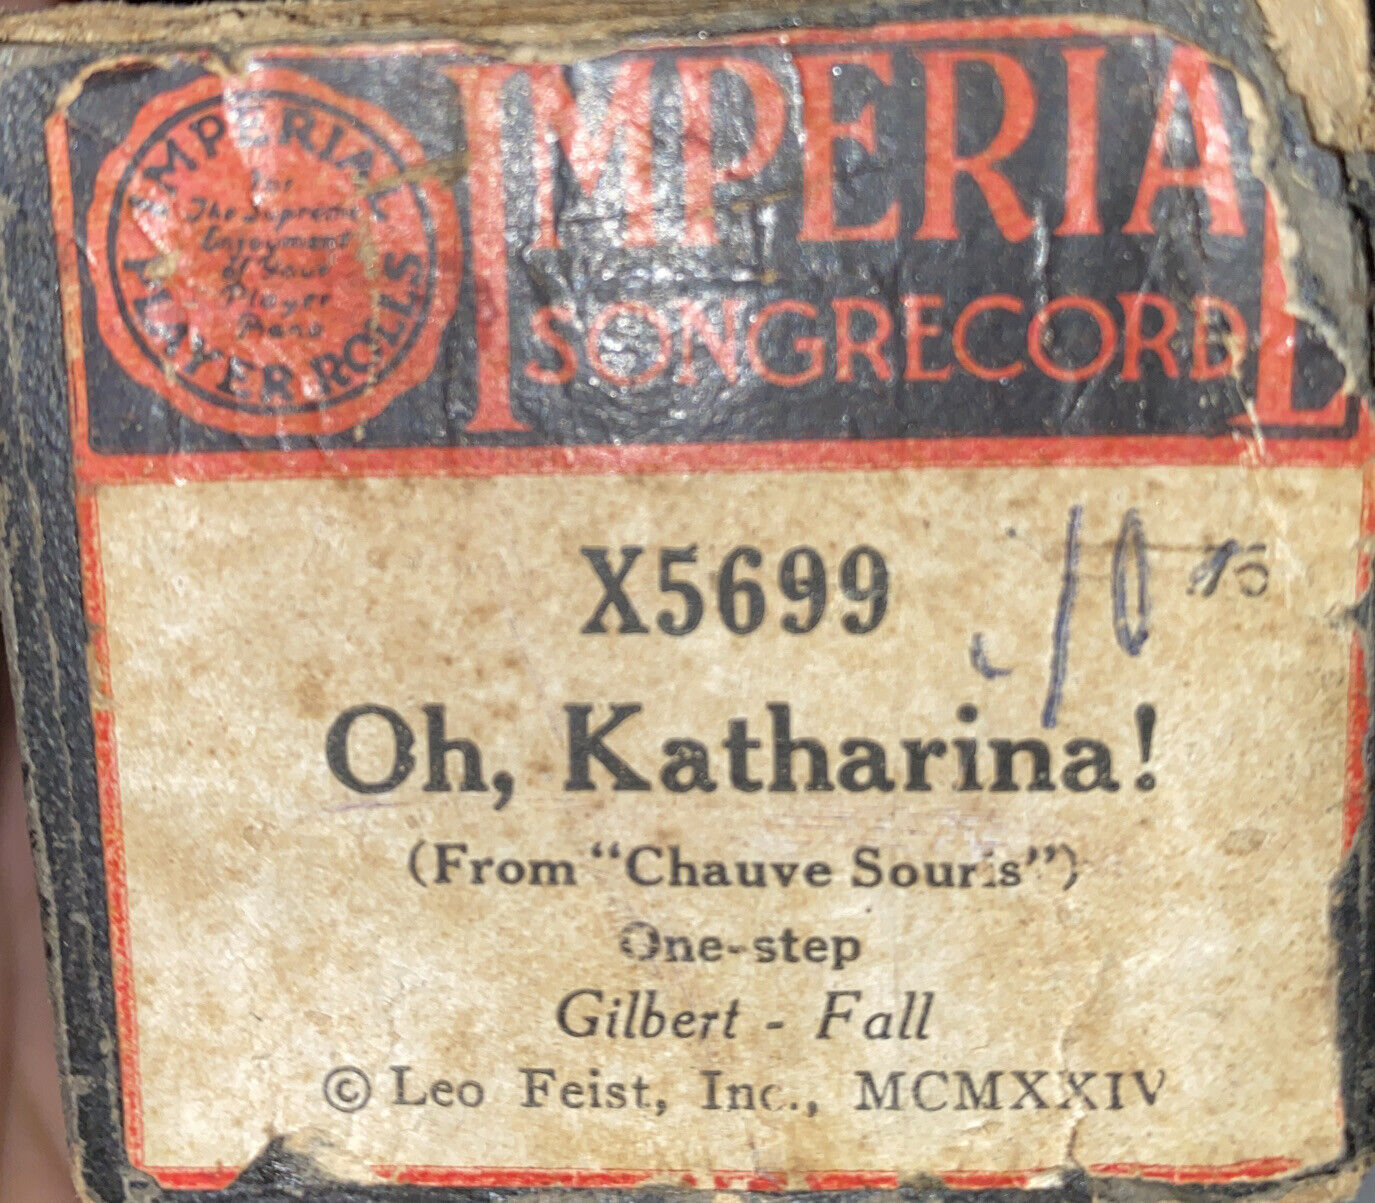 Vintage Imperial Songrecord X5699 OH KATHARINA Player Piano Roll